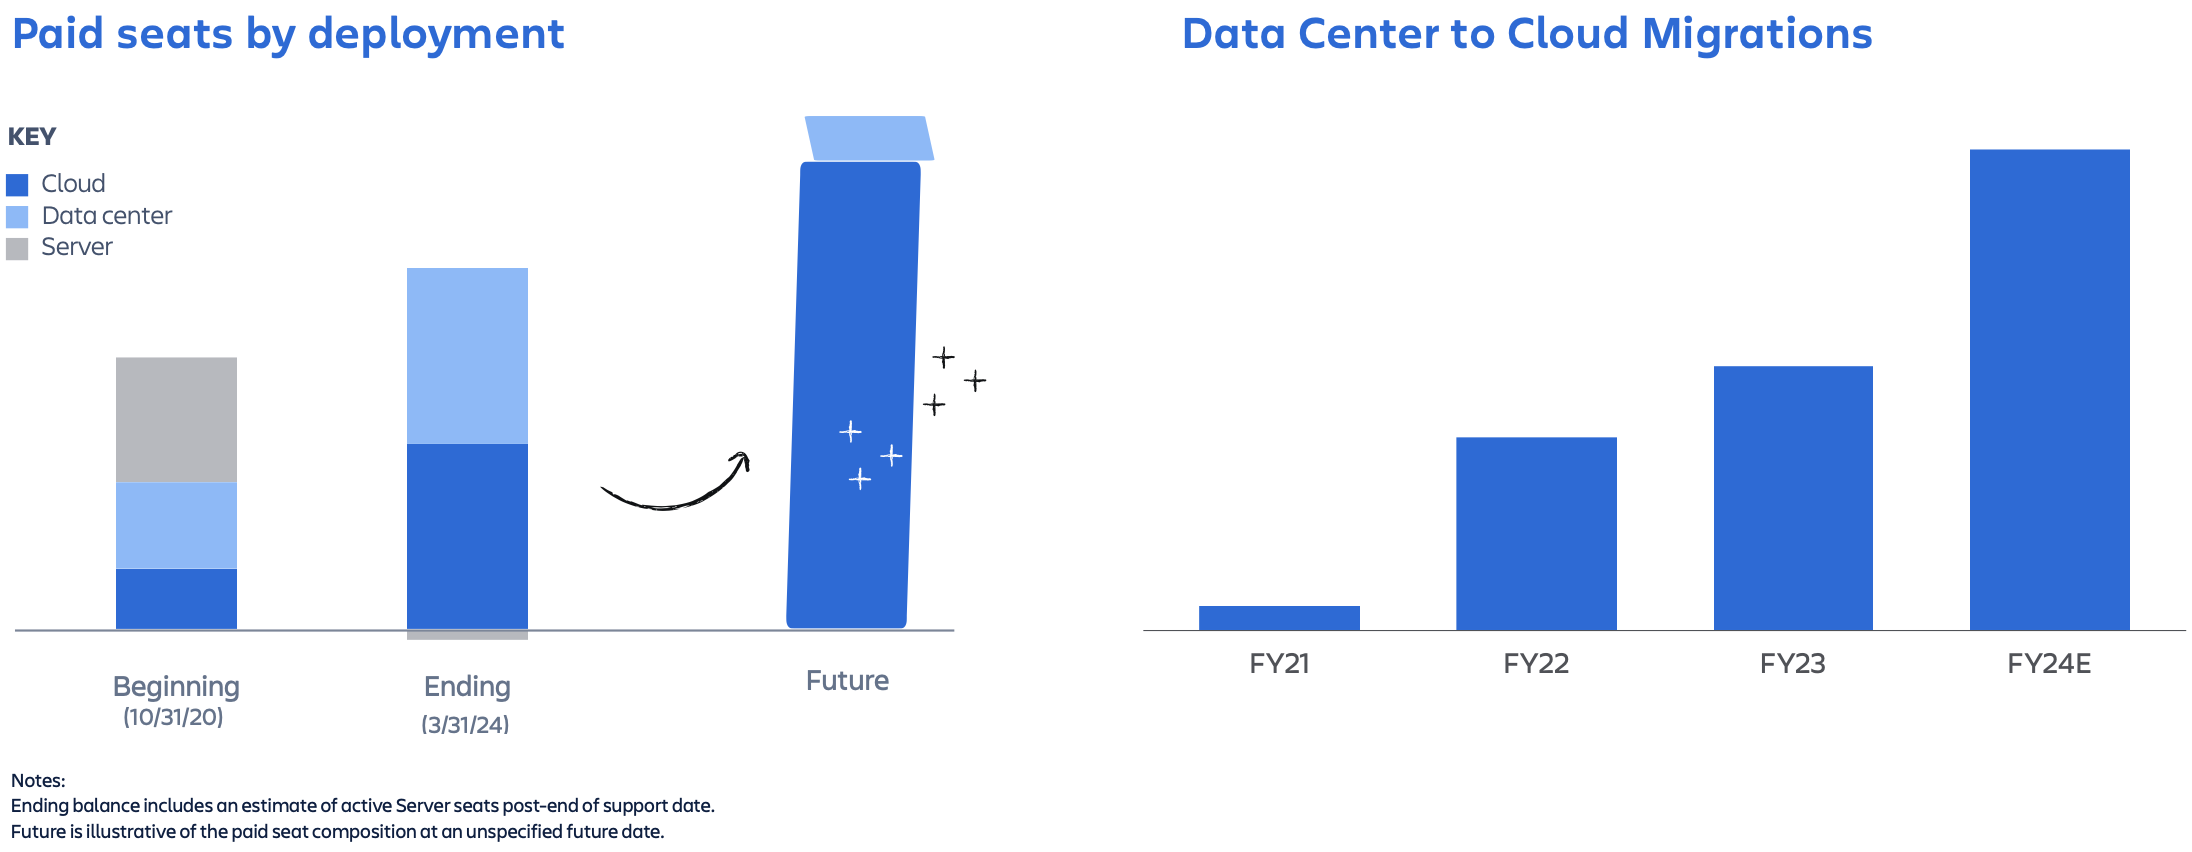 Graphs showing paid seats by deployment and Data Center to Cloud migrations